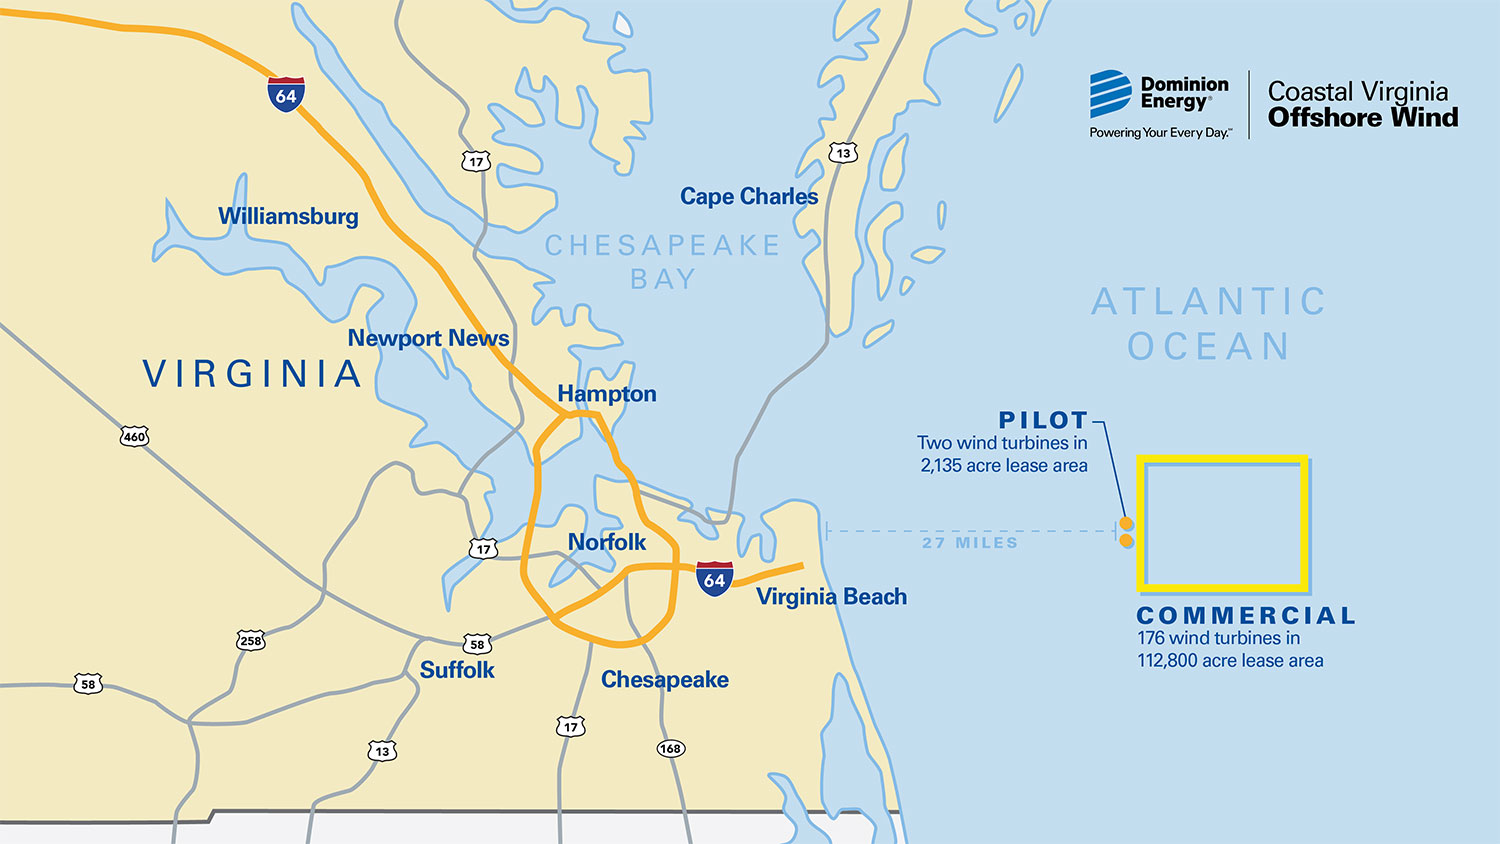 Coastal Virginia Offshore Wind project map showing pilot and commercial projects